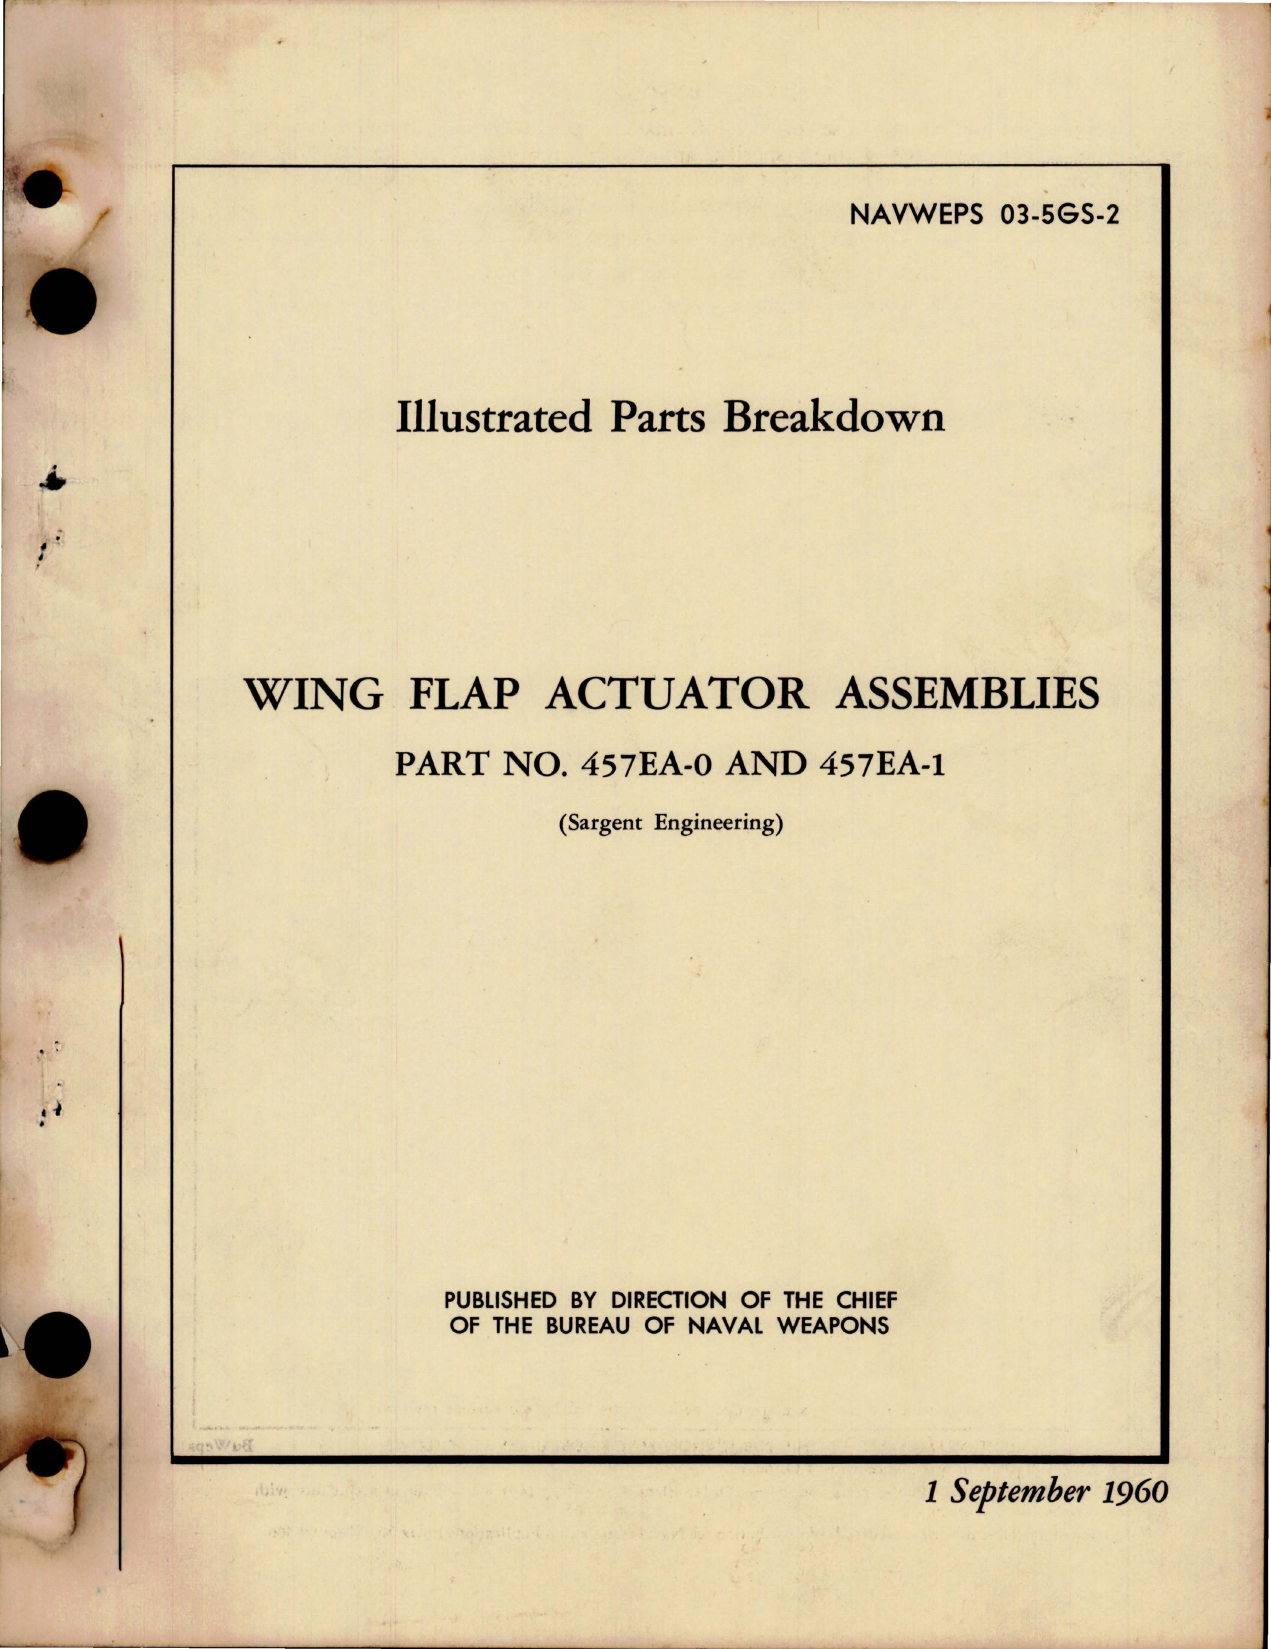 Sample page 1 from AirCorps Library document: Illustrated Parts Breakdown for Wing Flap Actuator Assemblies - Part 457EA-0 and 457EA-1 